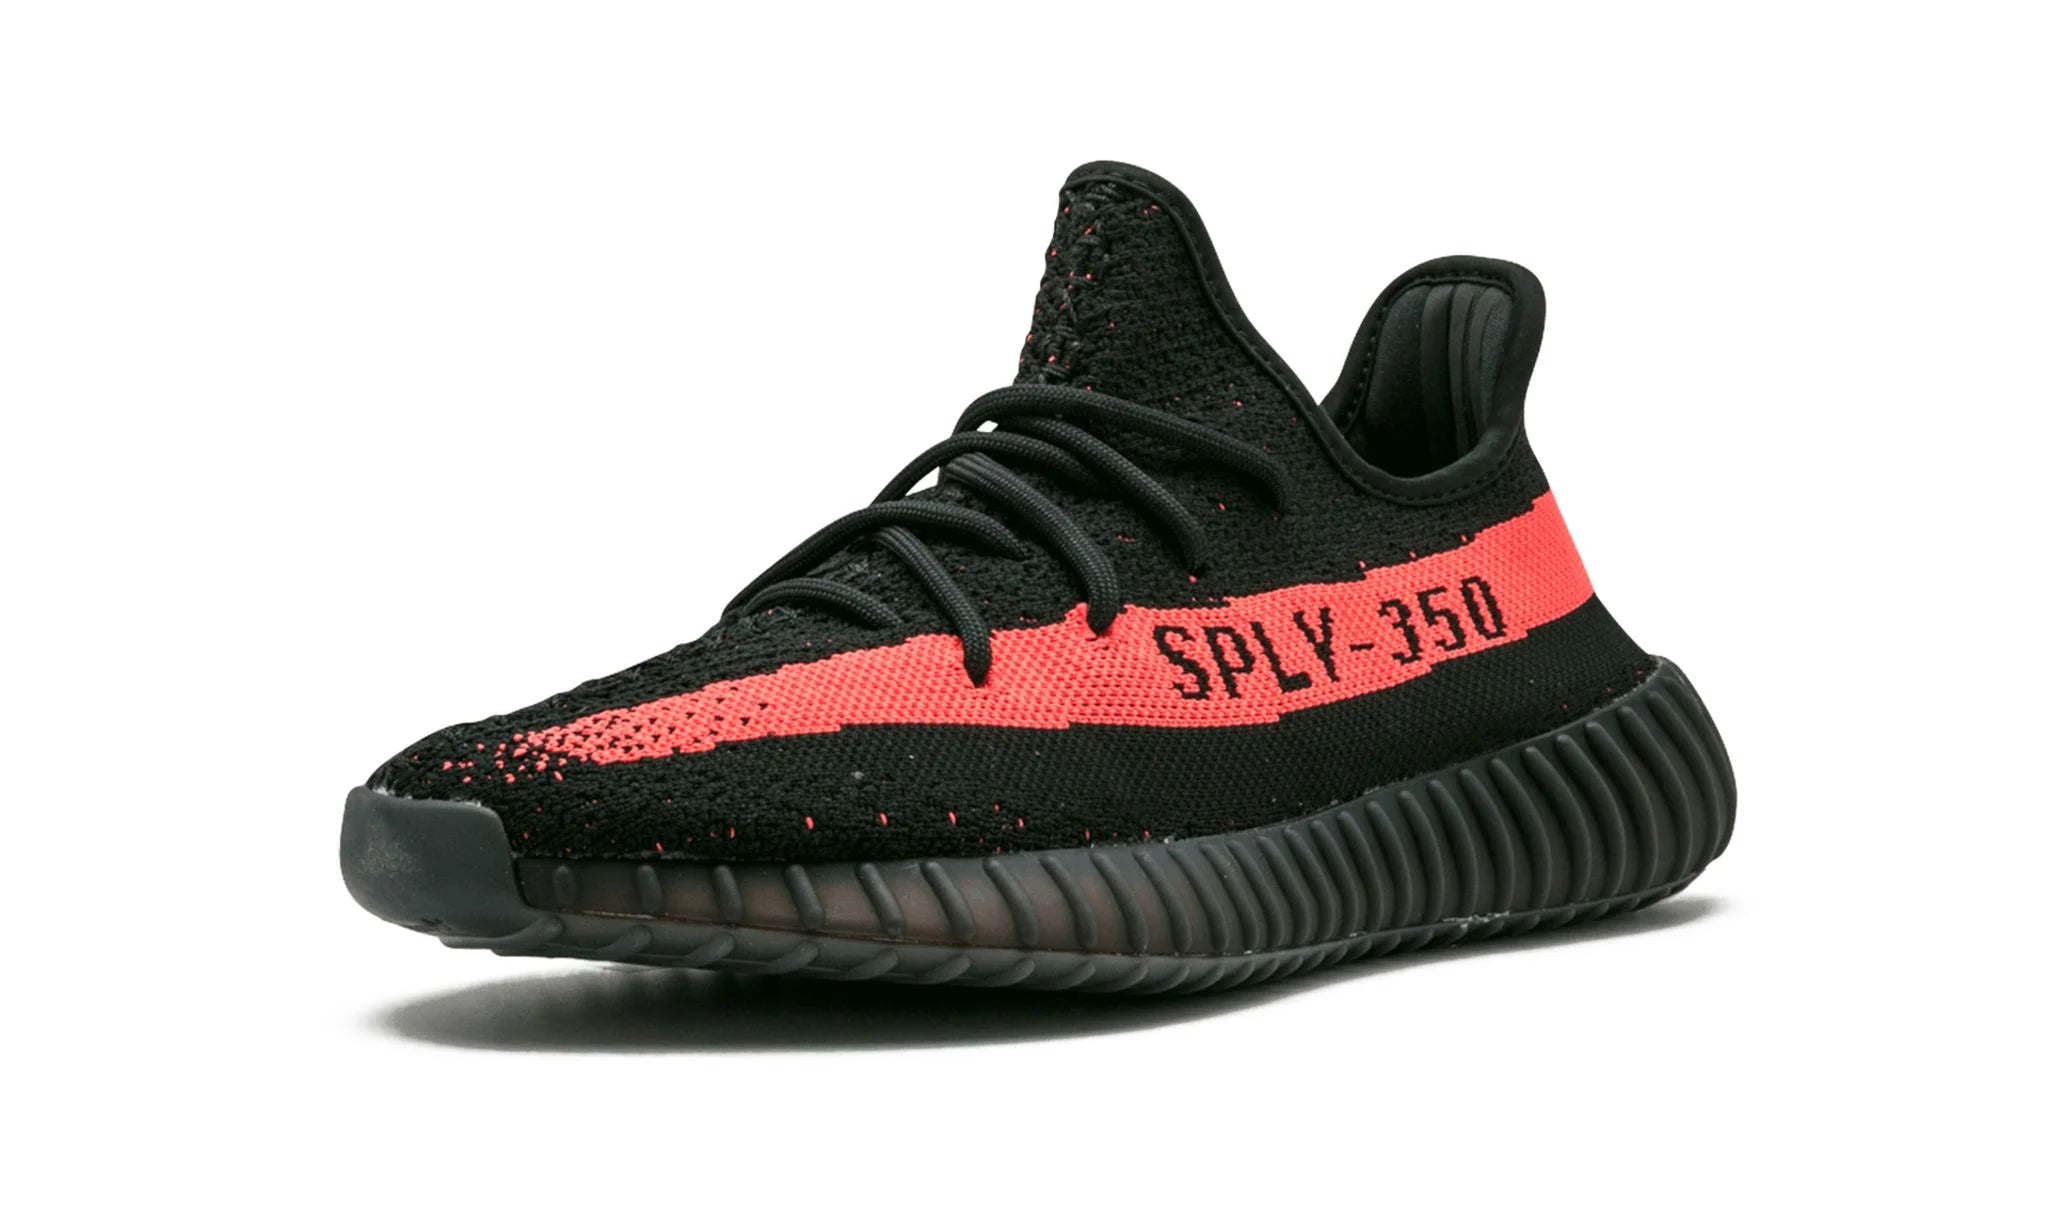 Yeezy Boost 350 V2 "Cored Red Black"